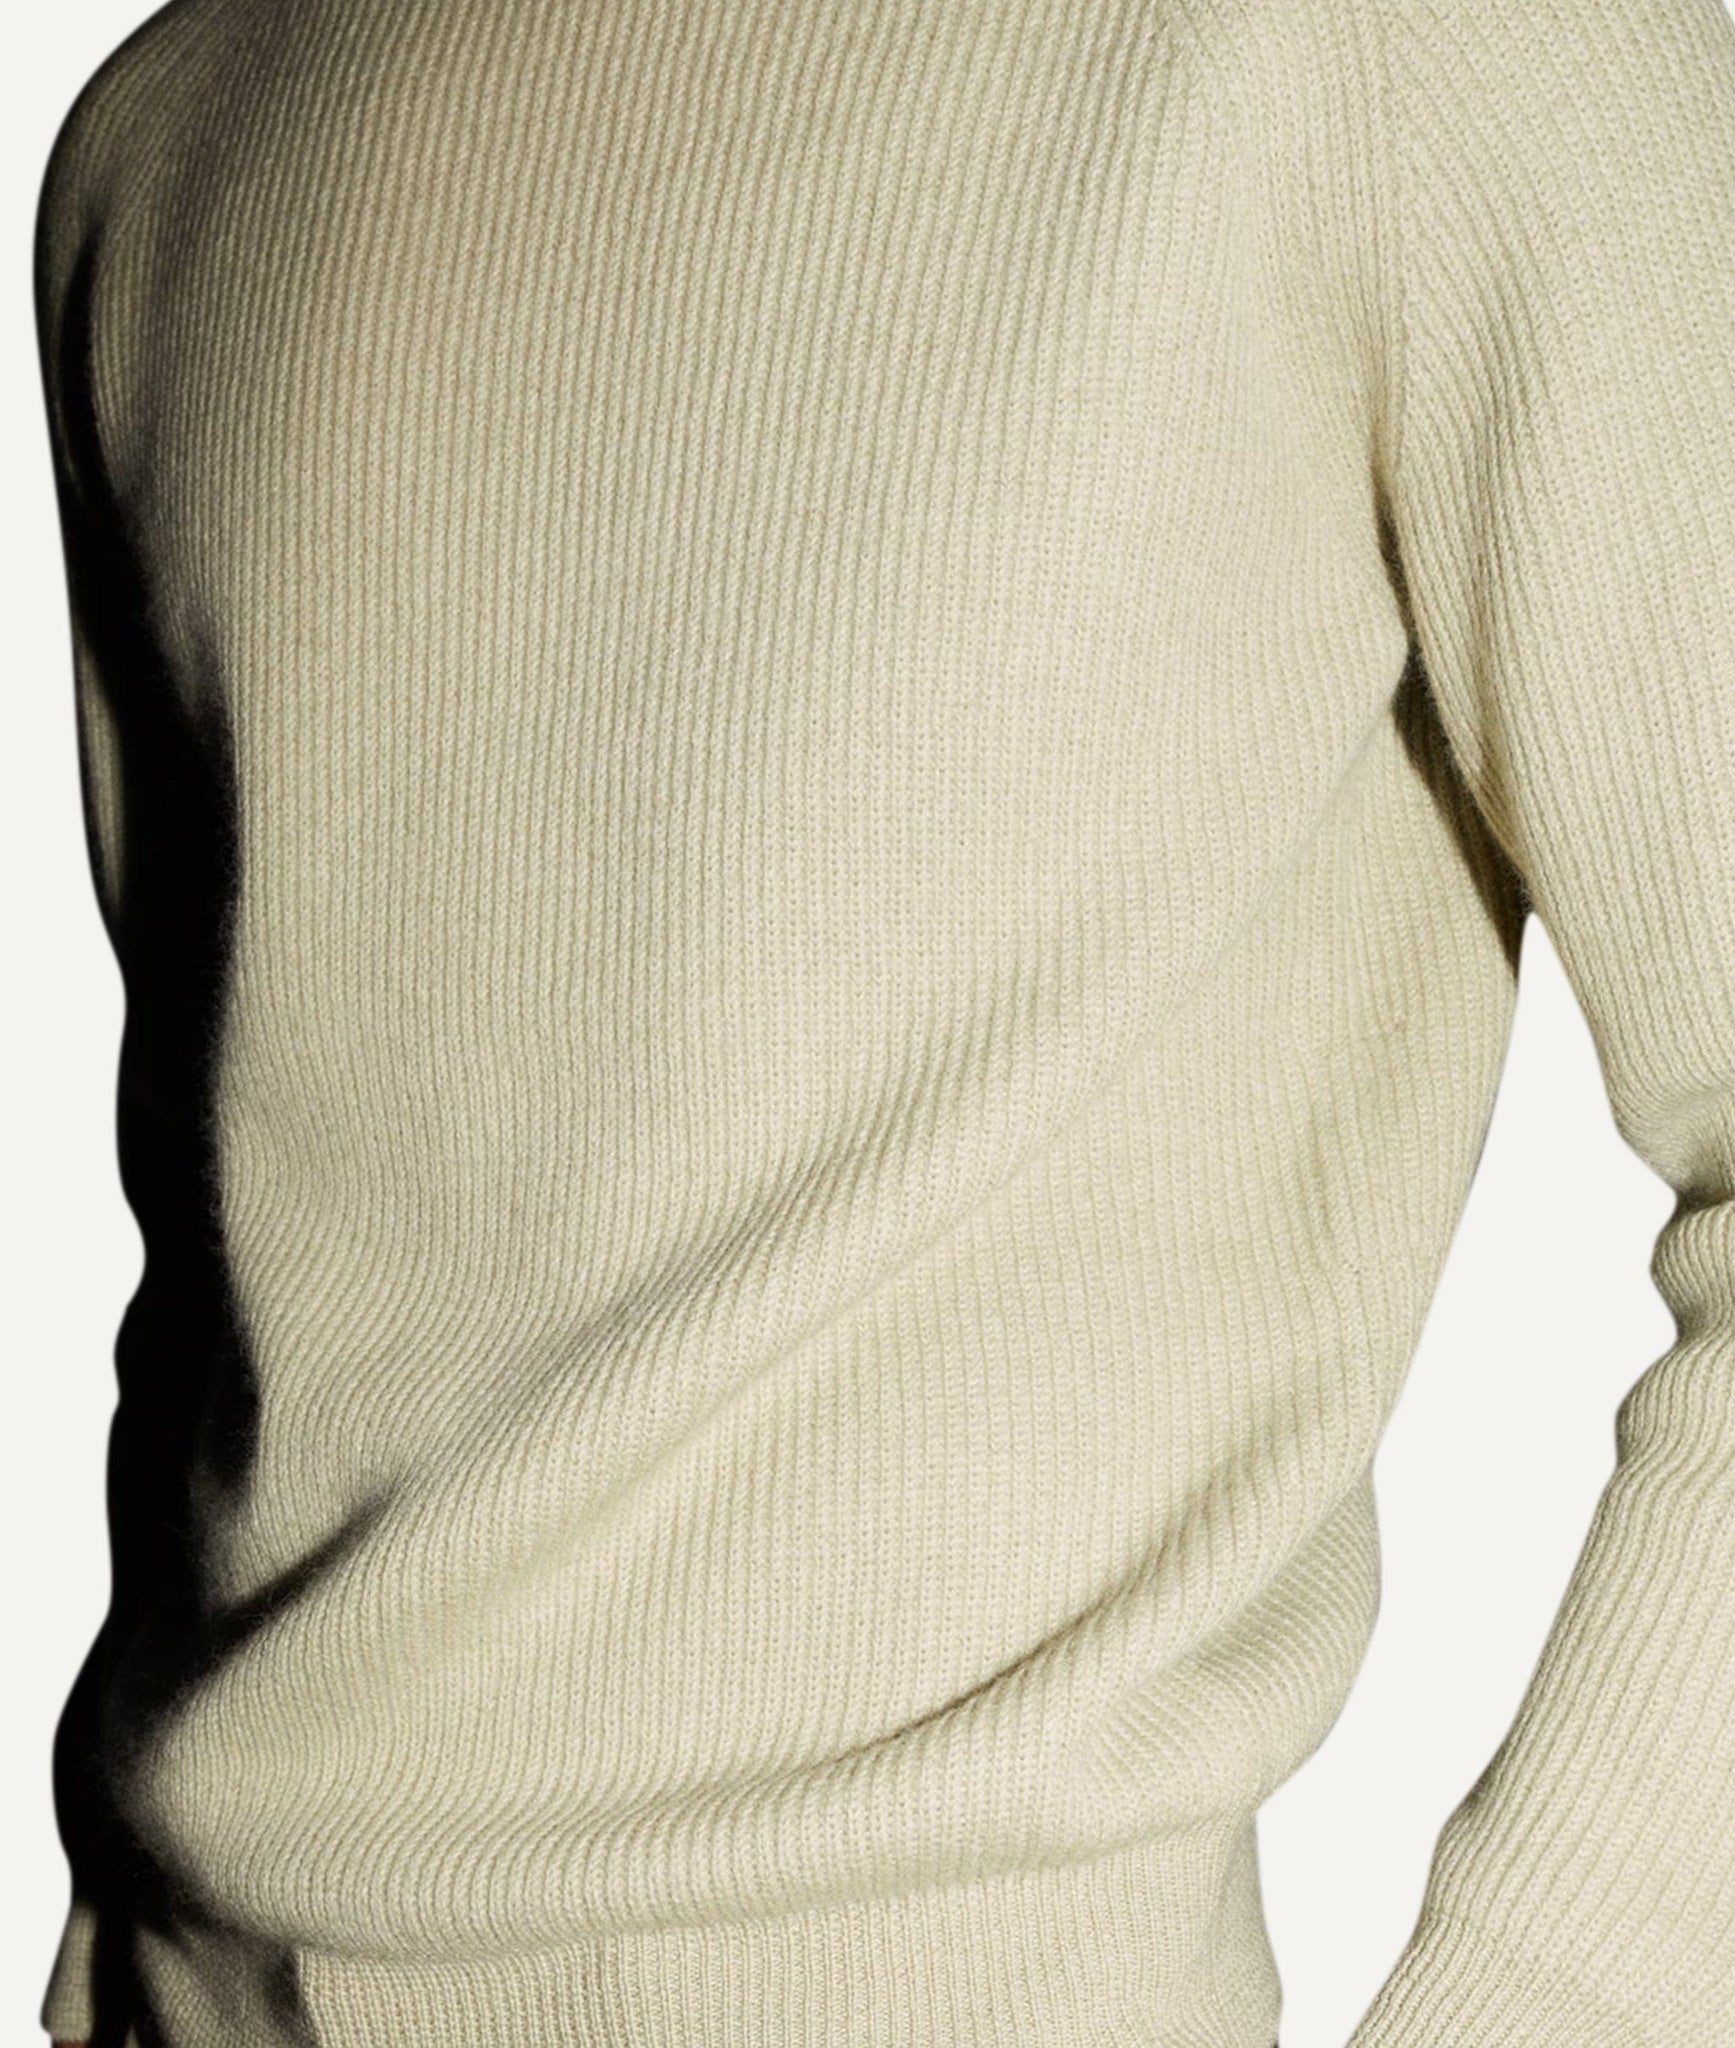 The Natural Dye Sweater